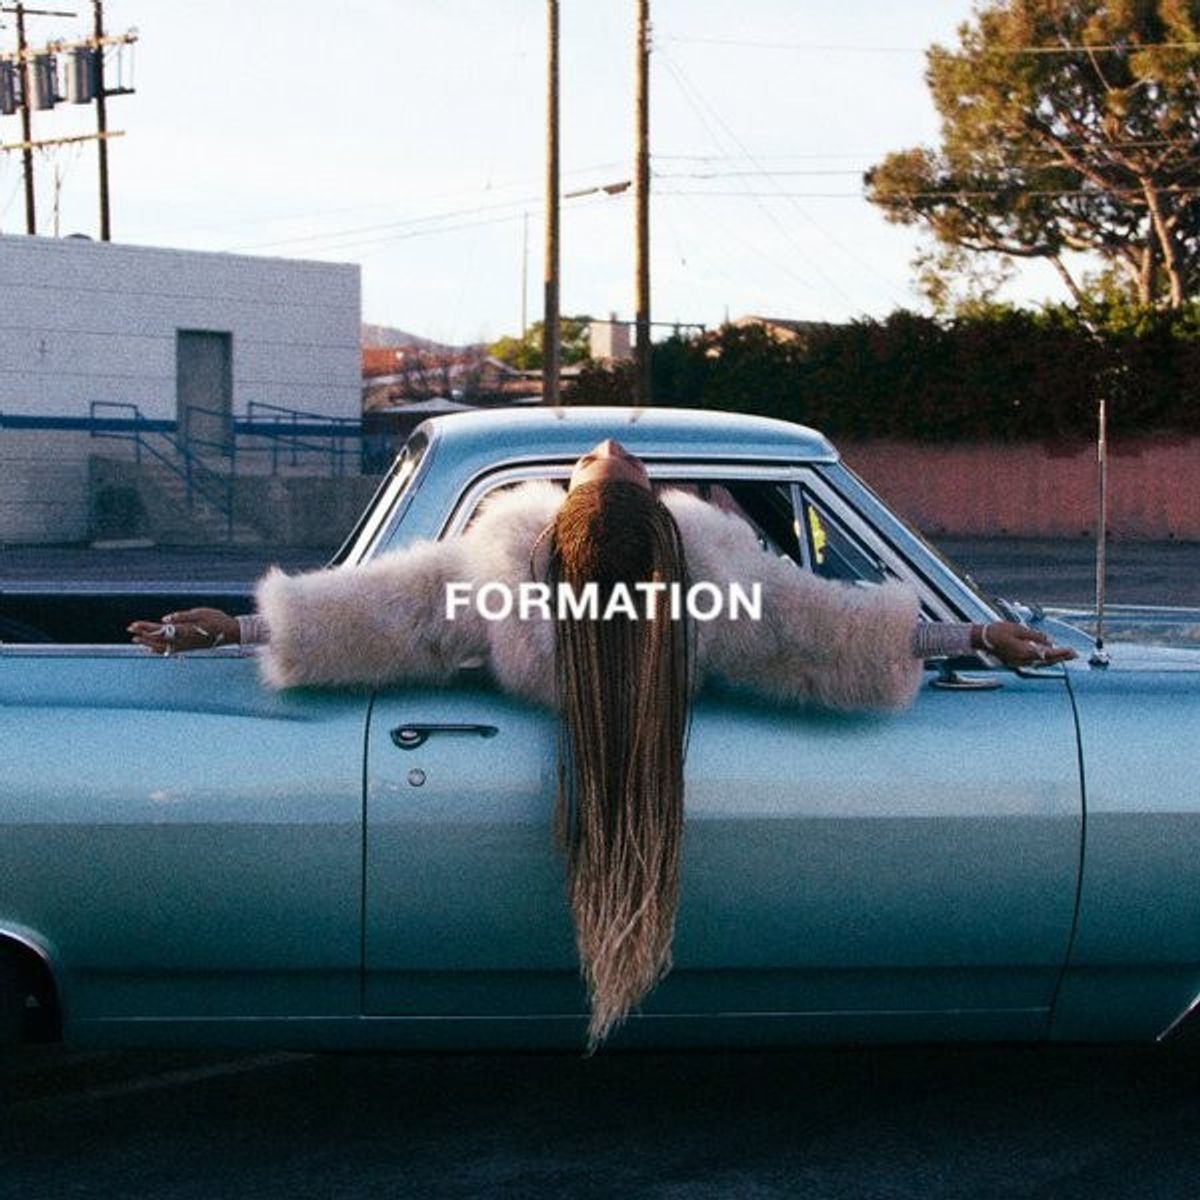 Beyonce’s Spicy New Single ‘Formation’ Is This Year's 'Black Power' Anthem